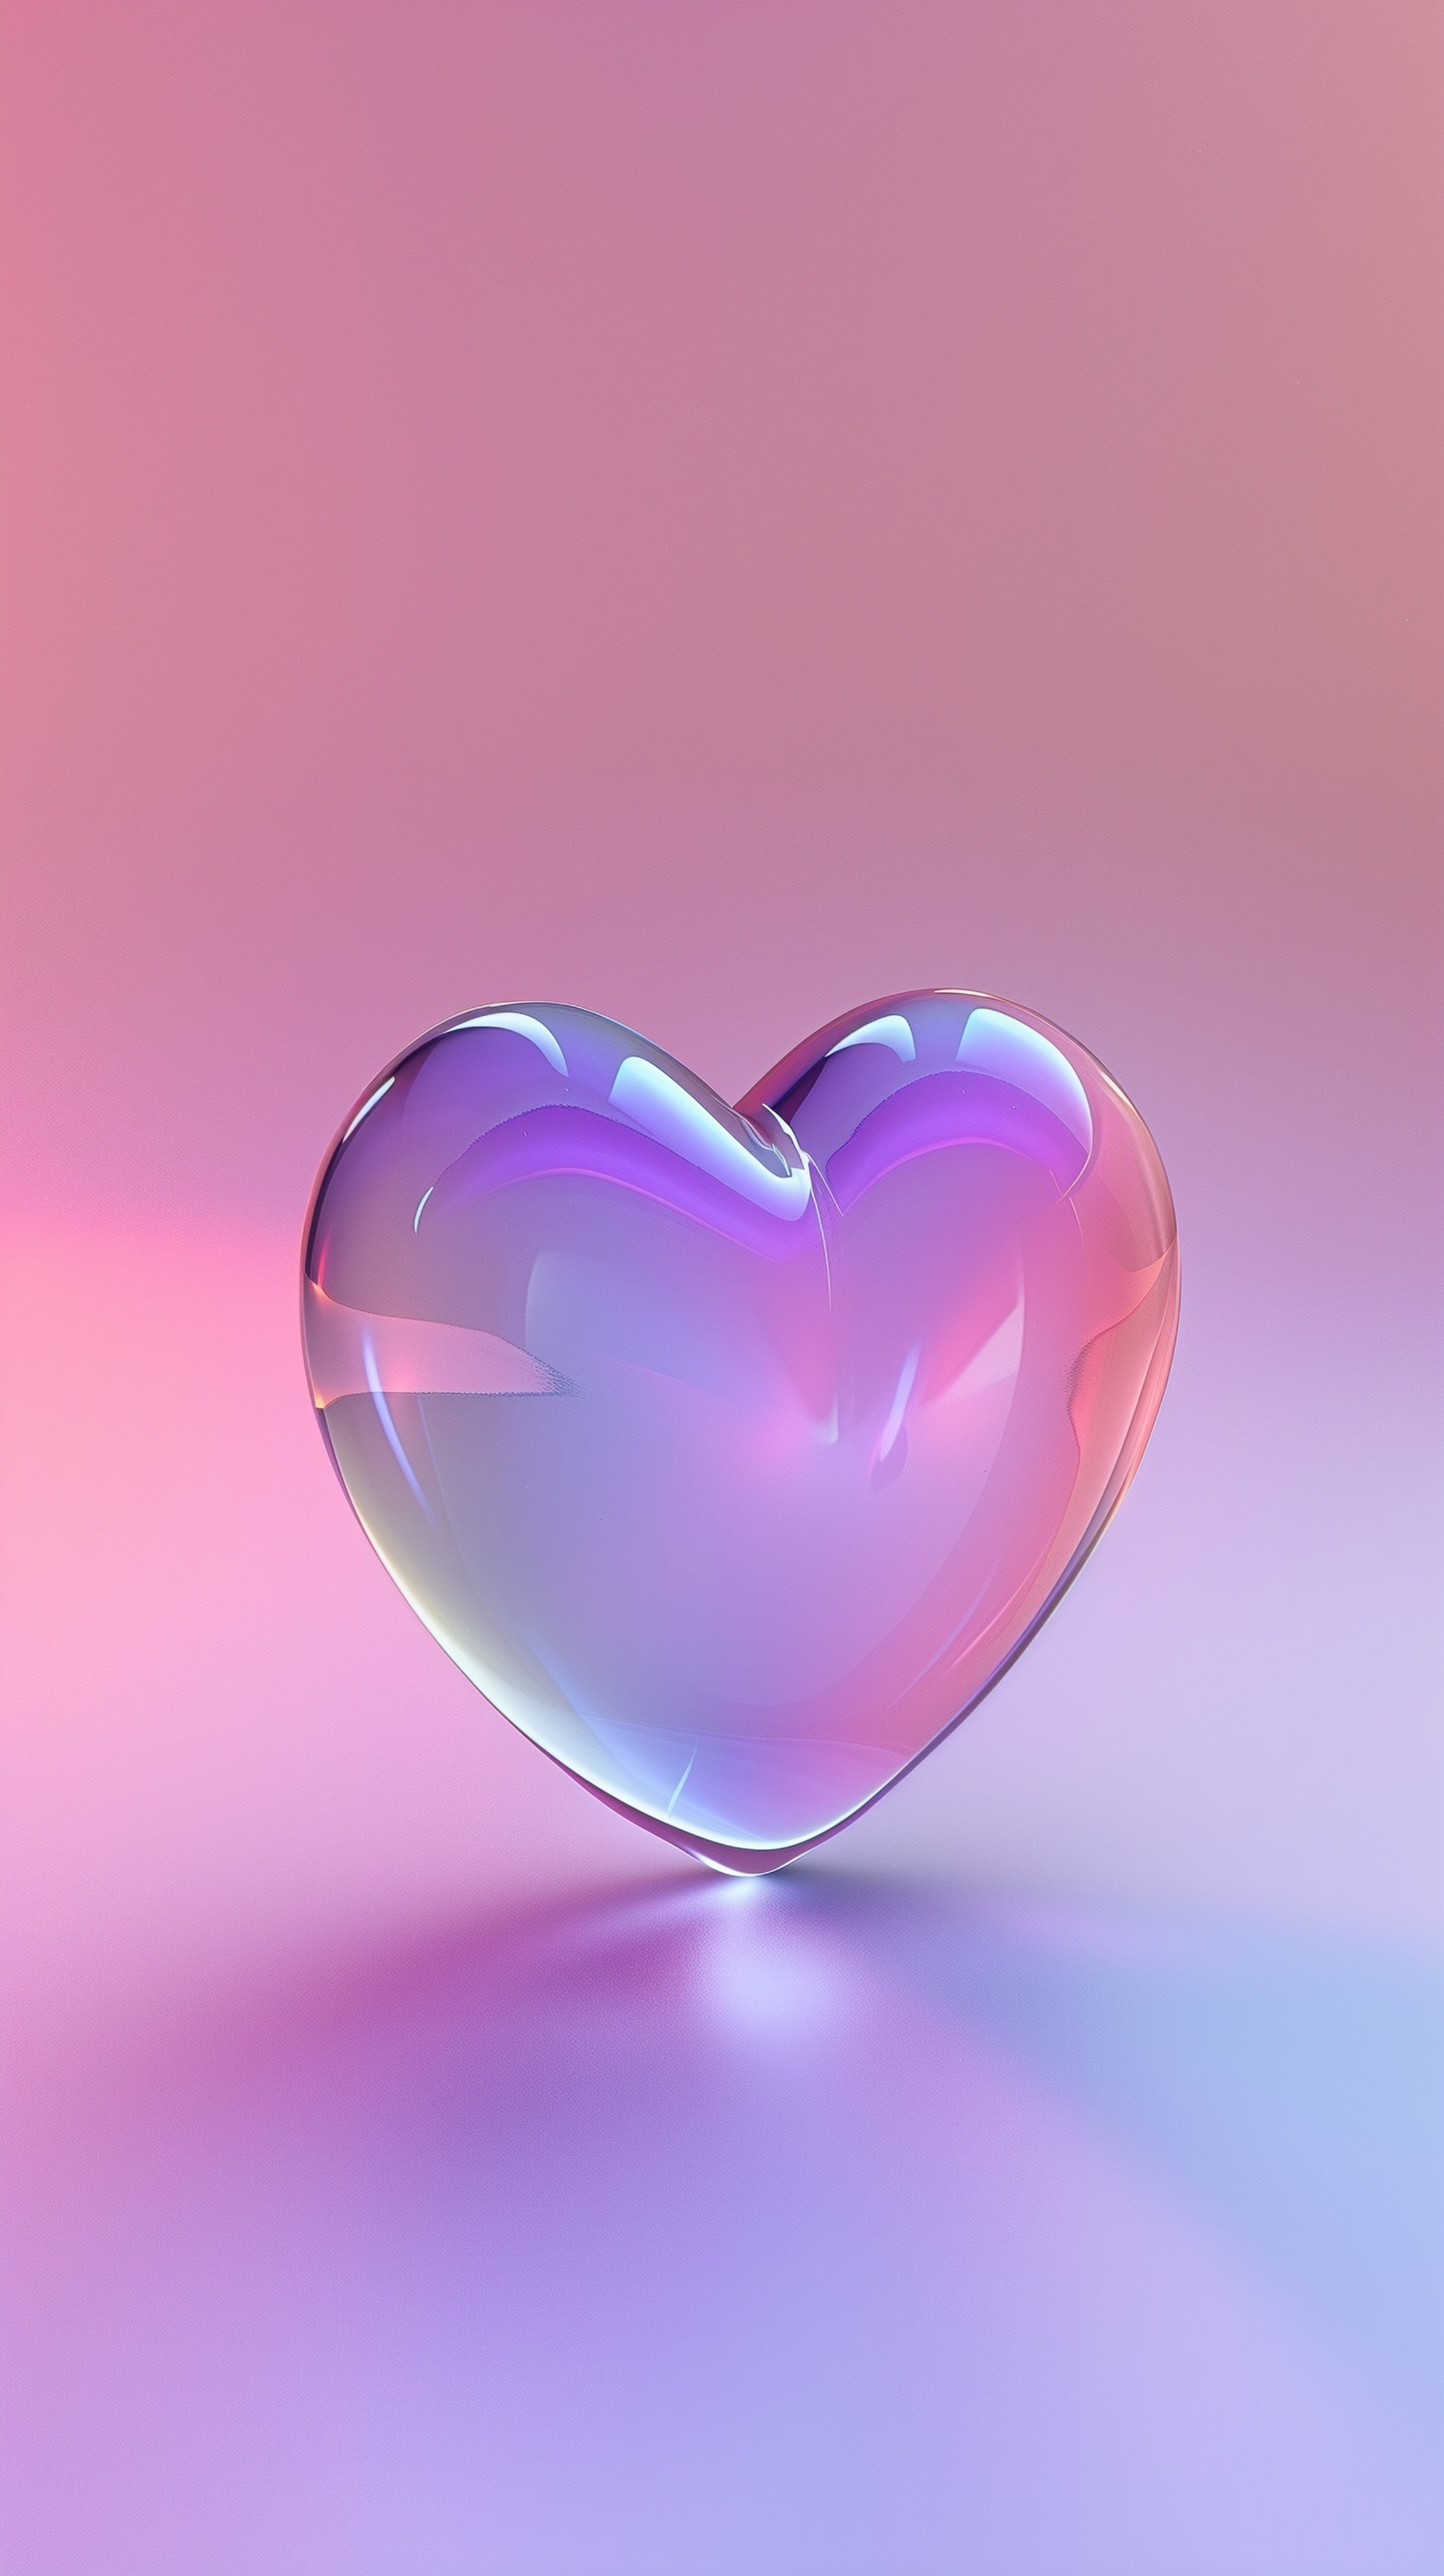 Colorful Glass Heart on Pink Background Tapeta[47d8940110524ca1b371]